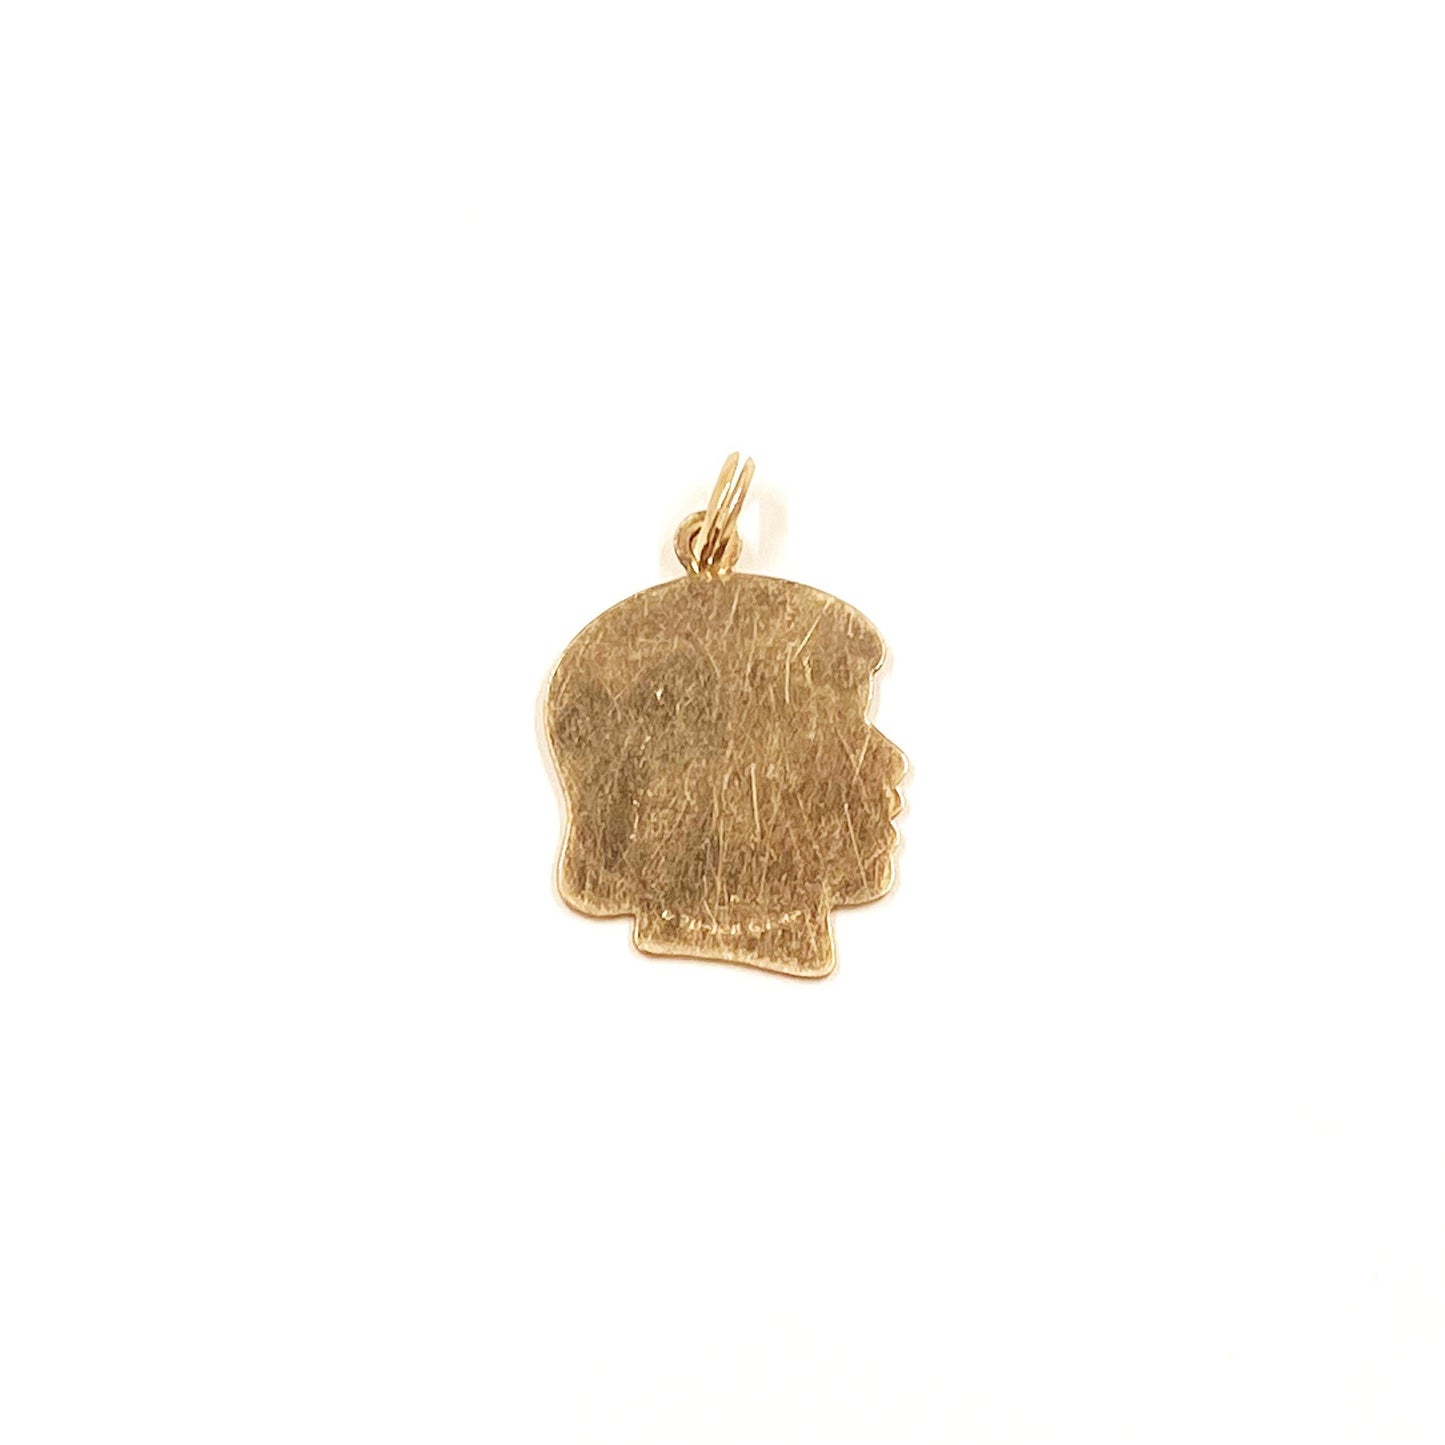 Vintage Girls Head Profile Charm | Gold Filled Girl Silhouette Charm |  R.L. Griffith 14k Gold Filled Engraving Charm